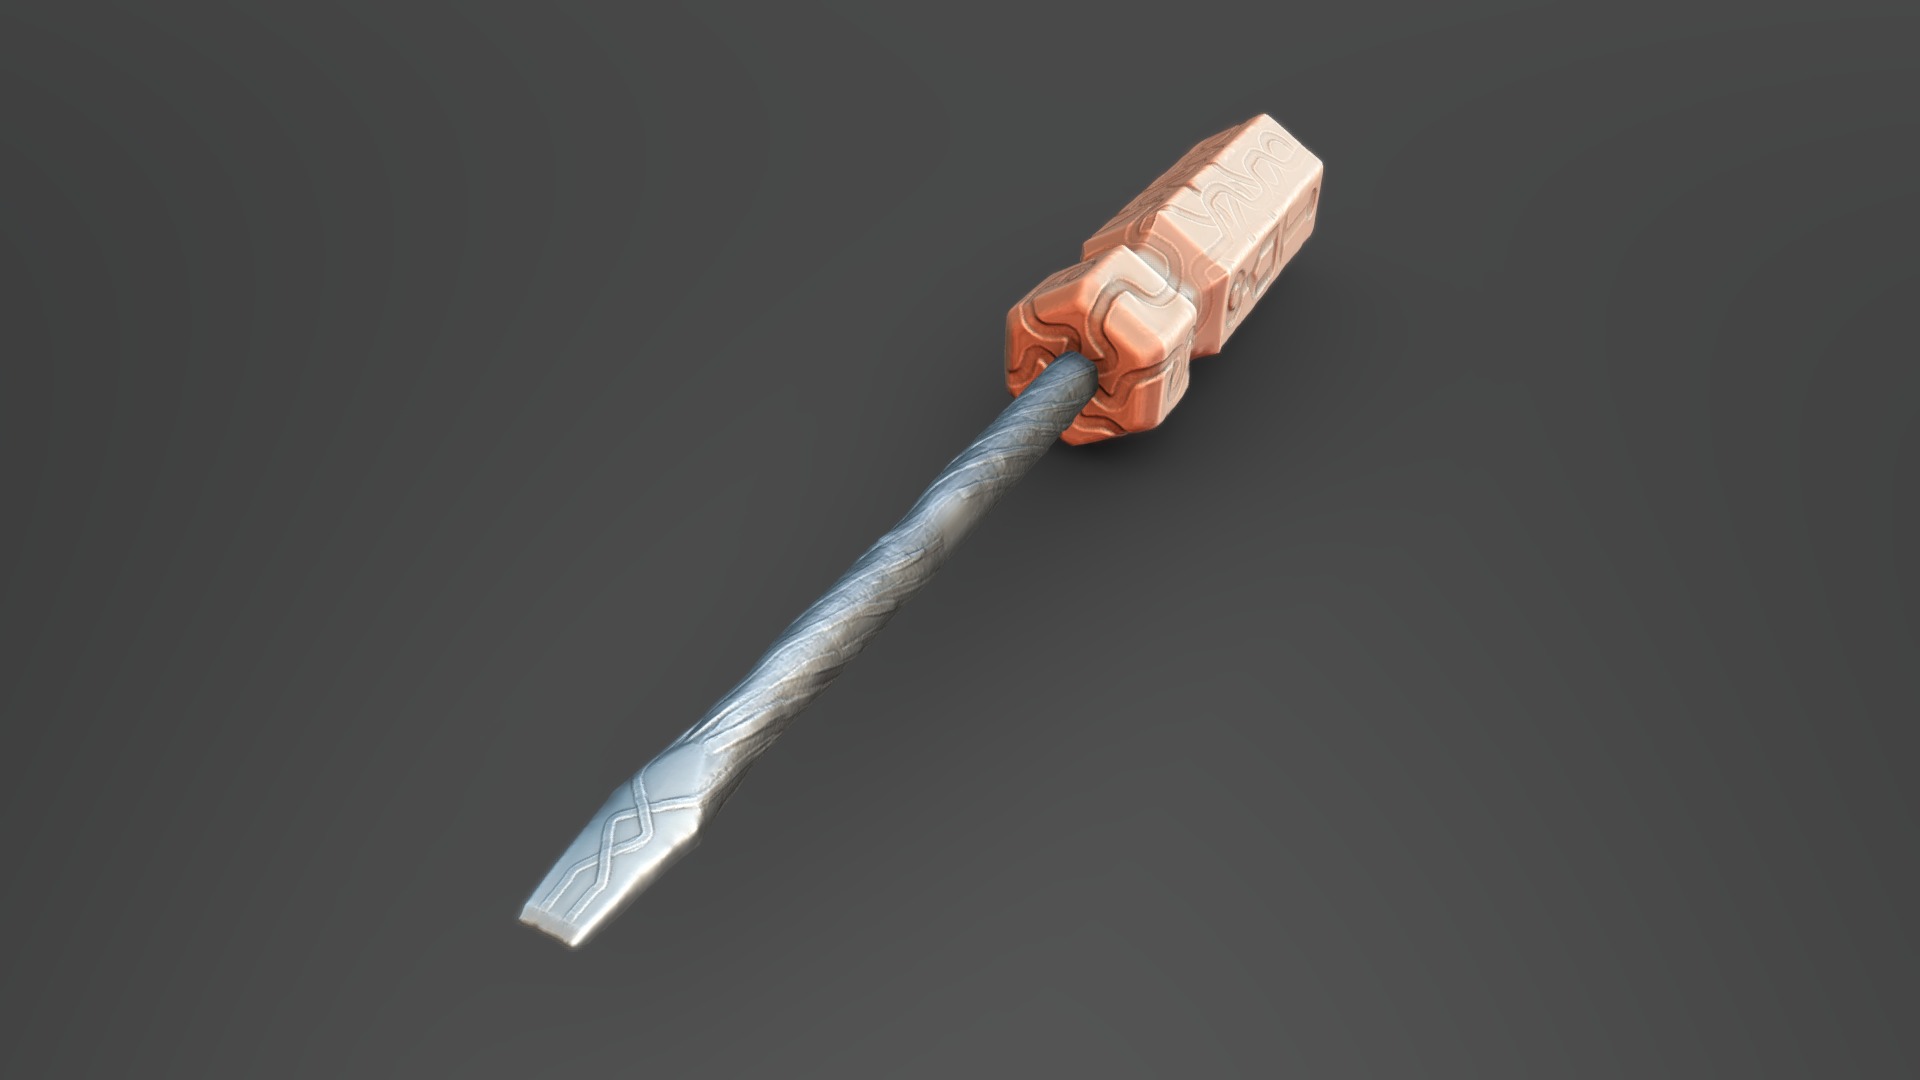 3D model Sculpt January 2020 Jan 20 – Tool - This is a 3D model of the Sculpt January 2020 Jan 20 - Tool. The 3D model is about a close-up of a syringe.